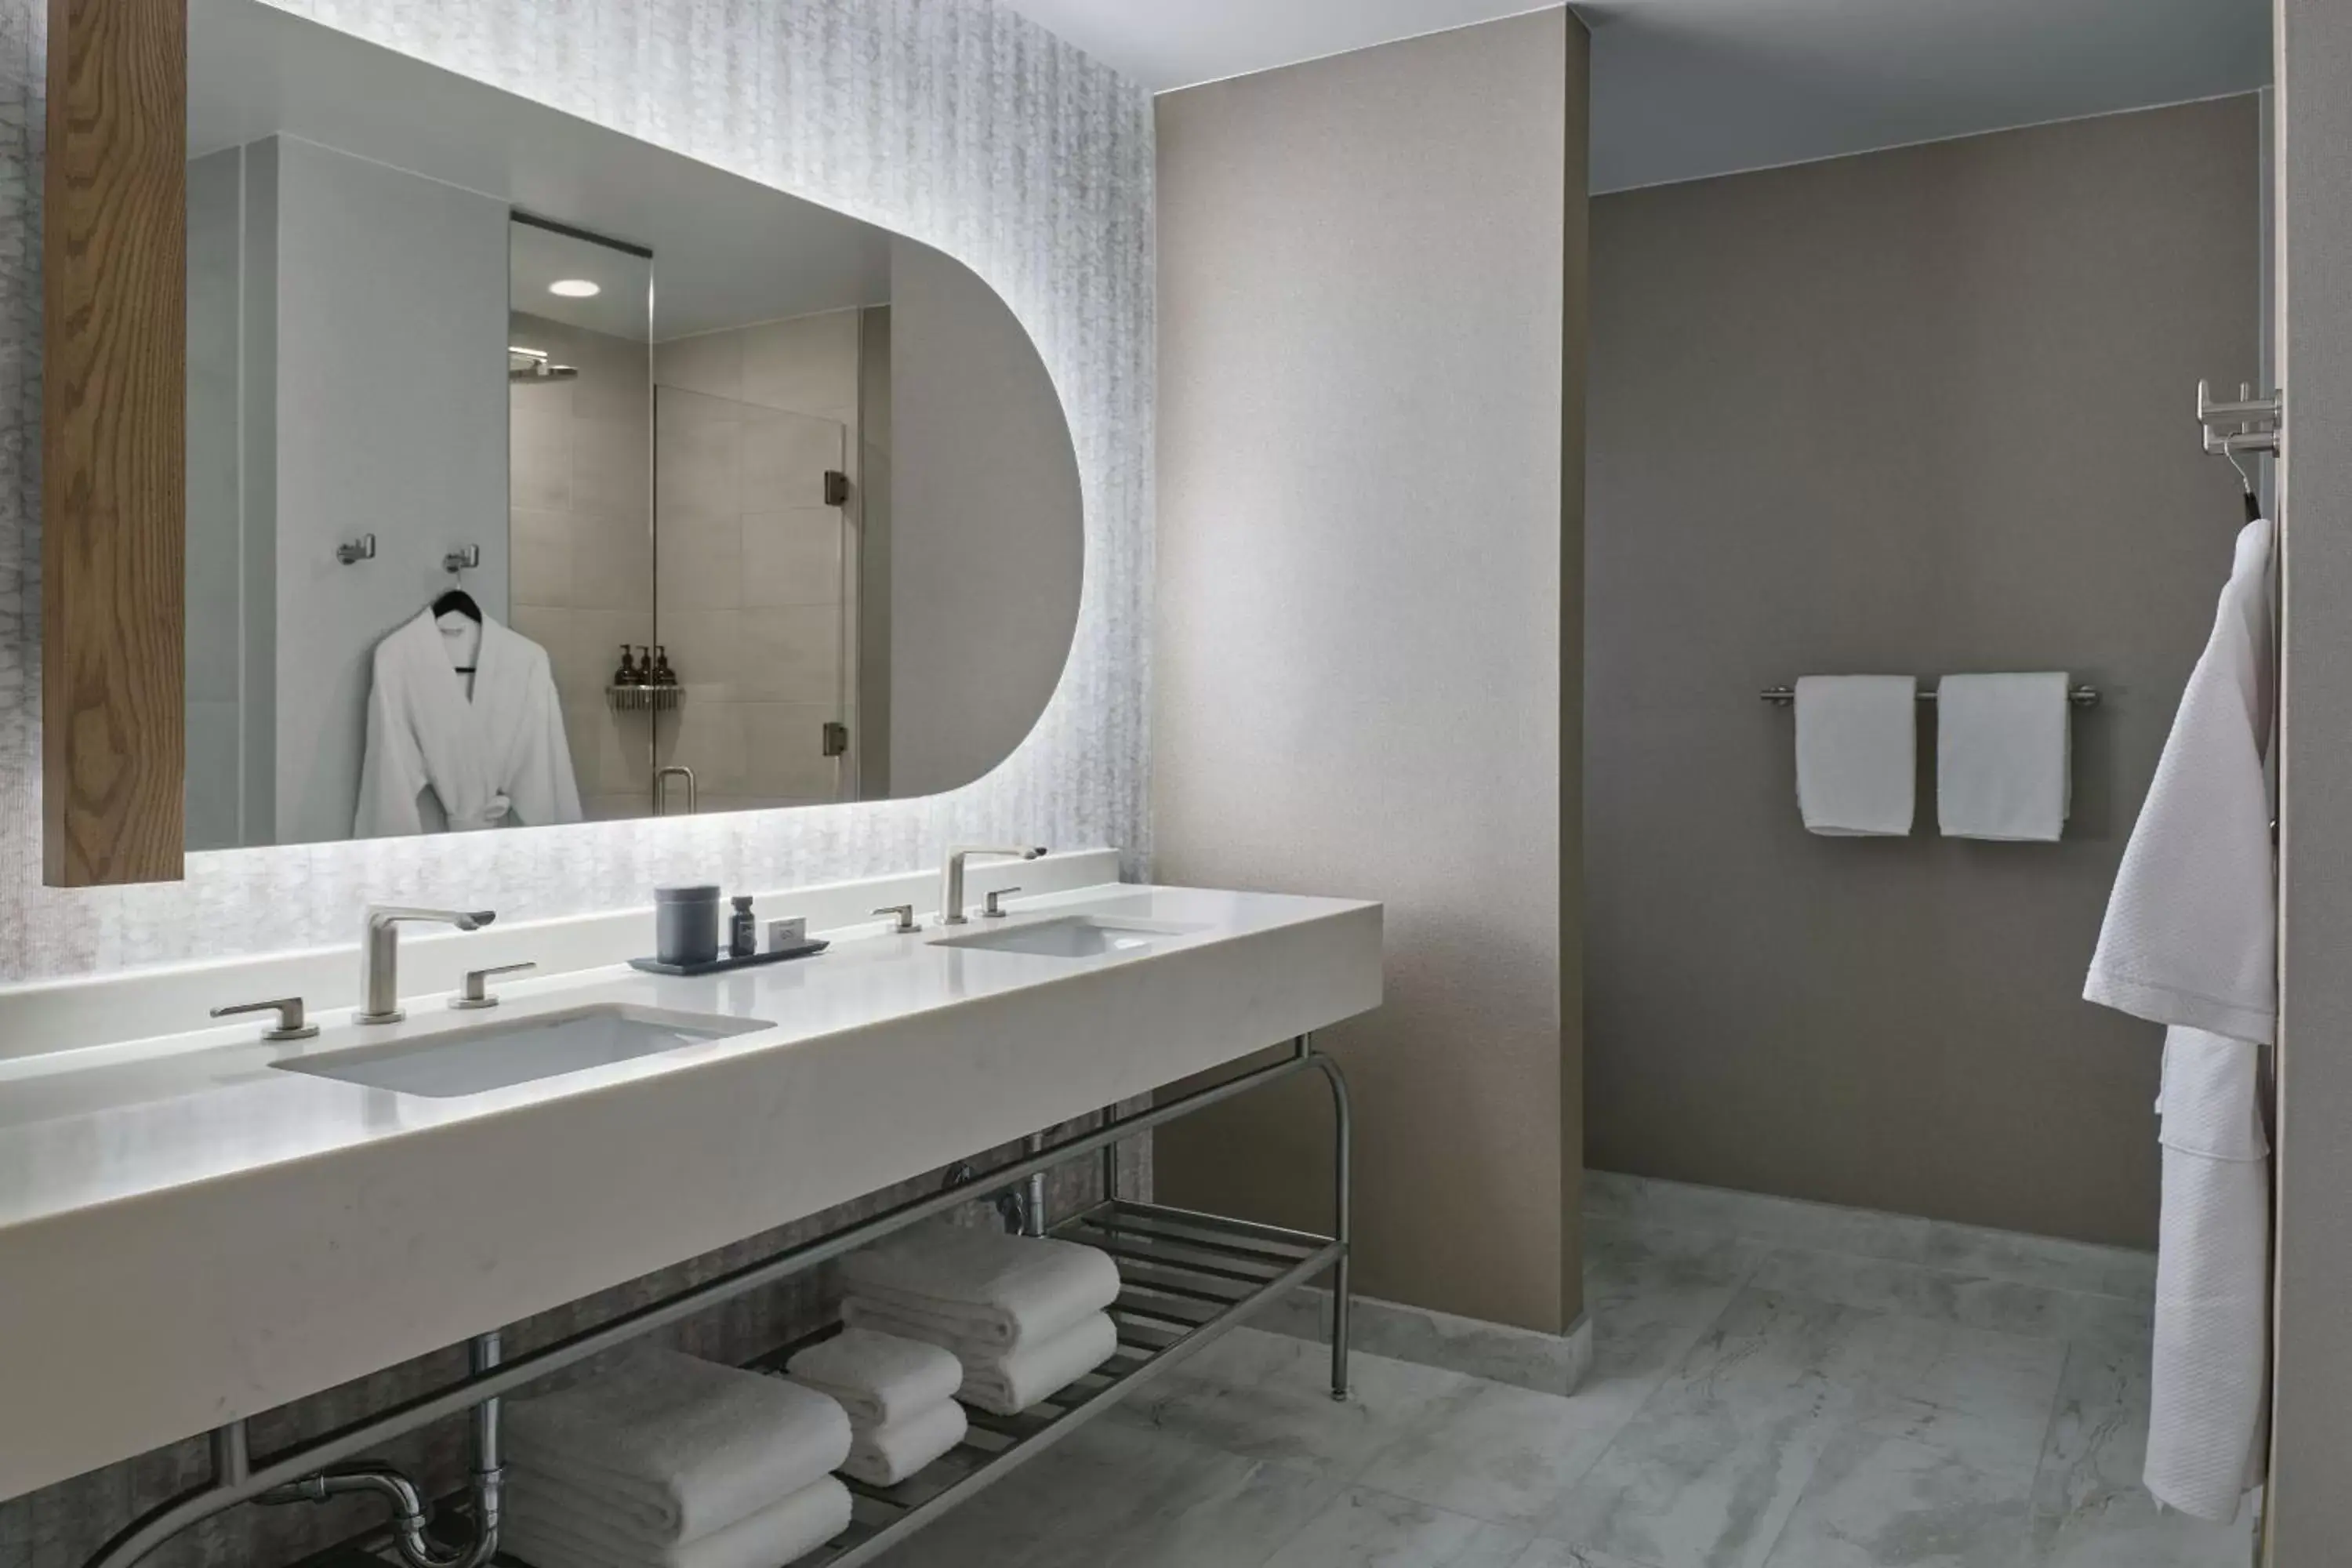 Bathroom in Viewline Resort Snowmass, Autograph Collection